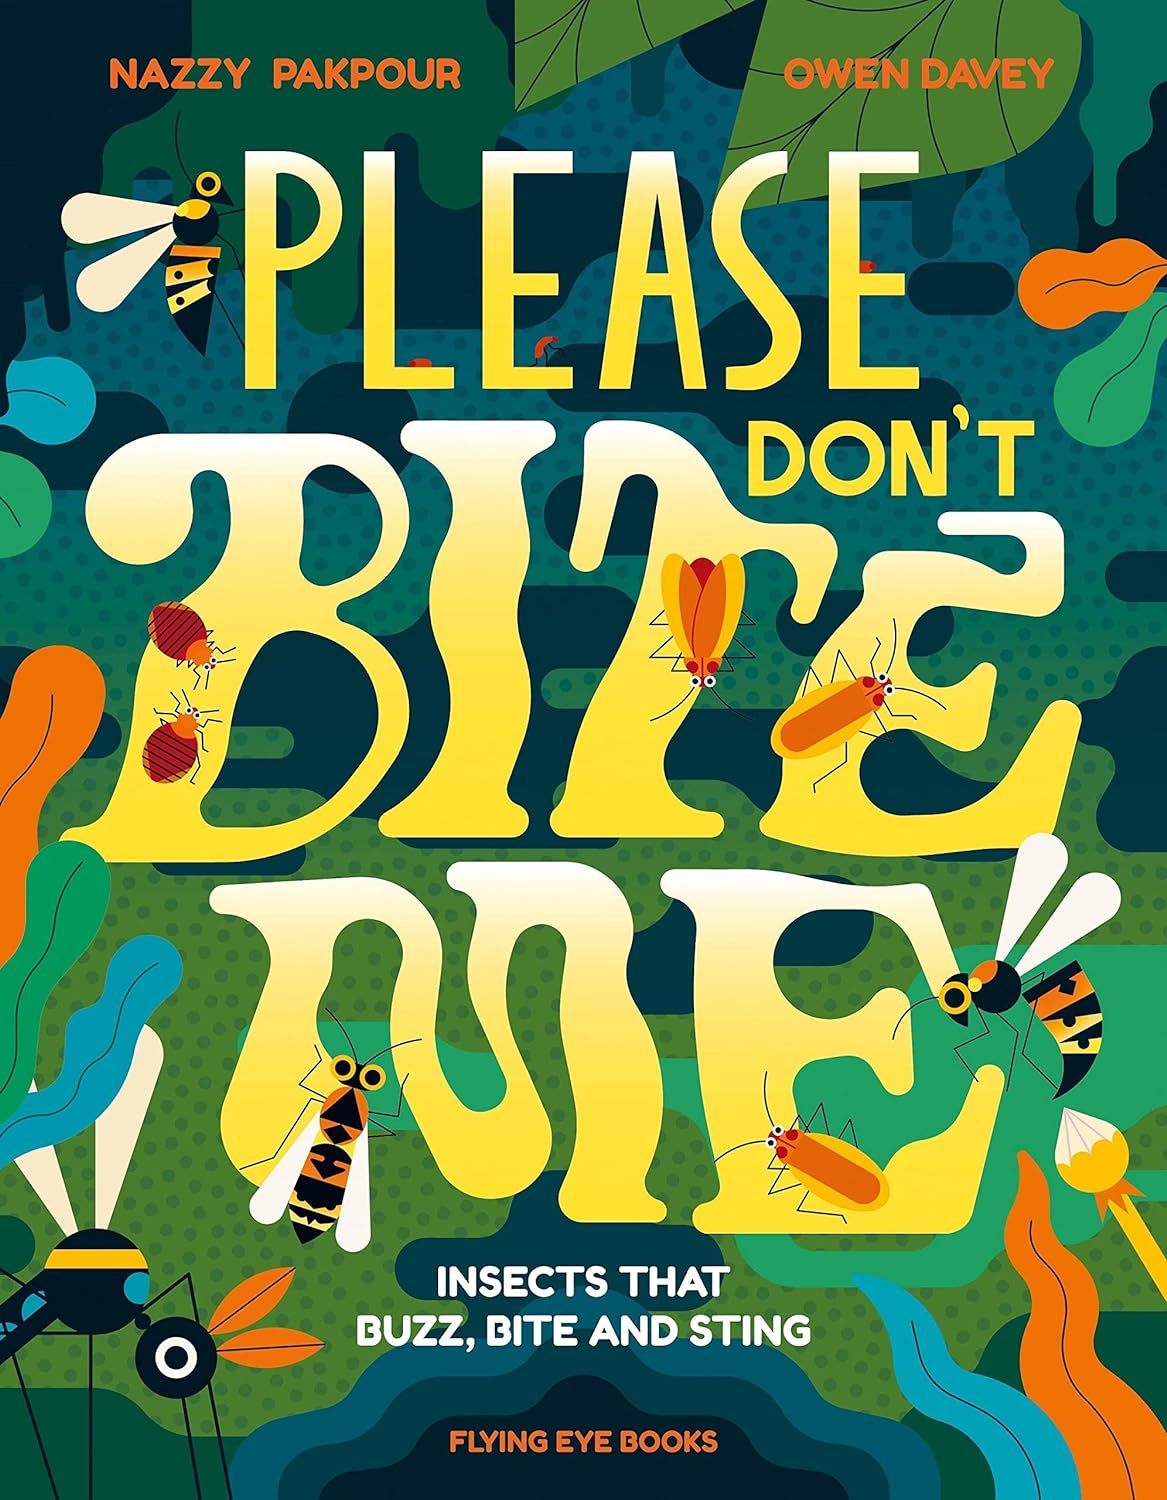 Please Don’t Bite Me: Insects that Buzz, Bite and Sting高性价比高么？